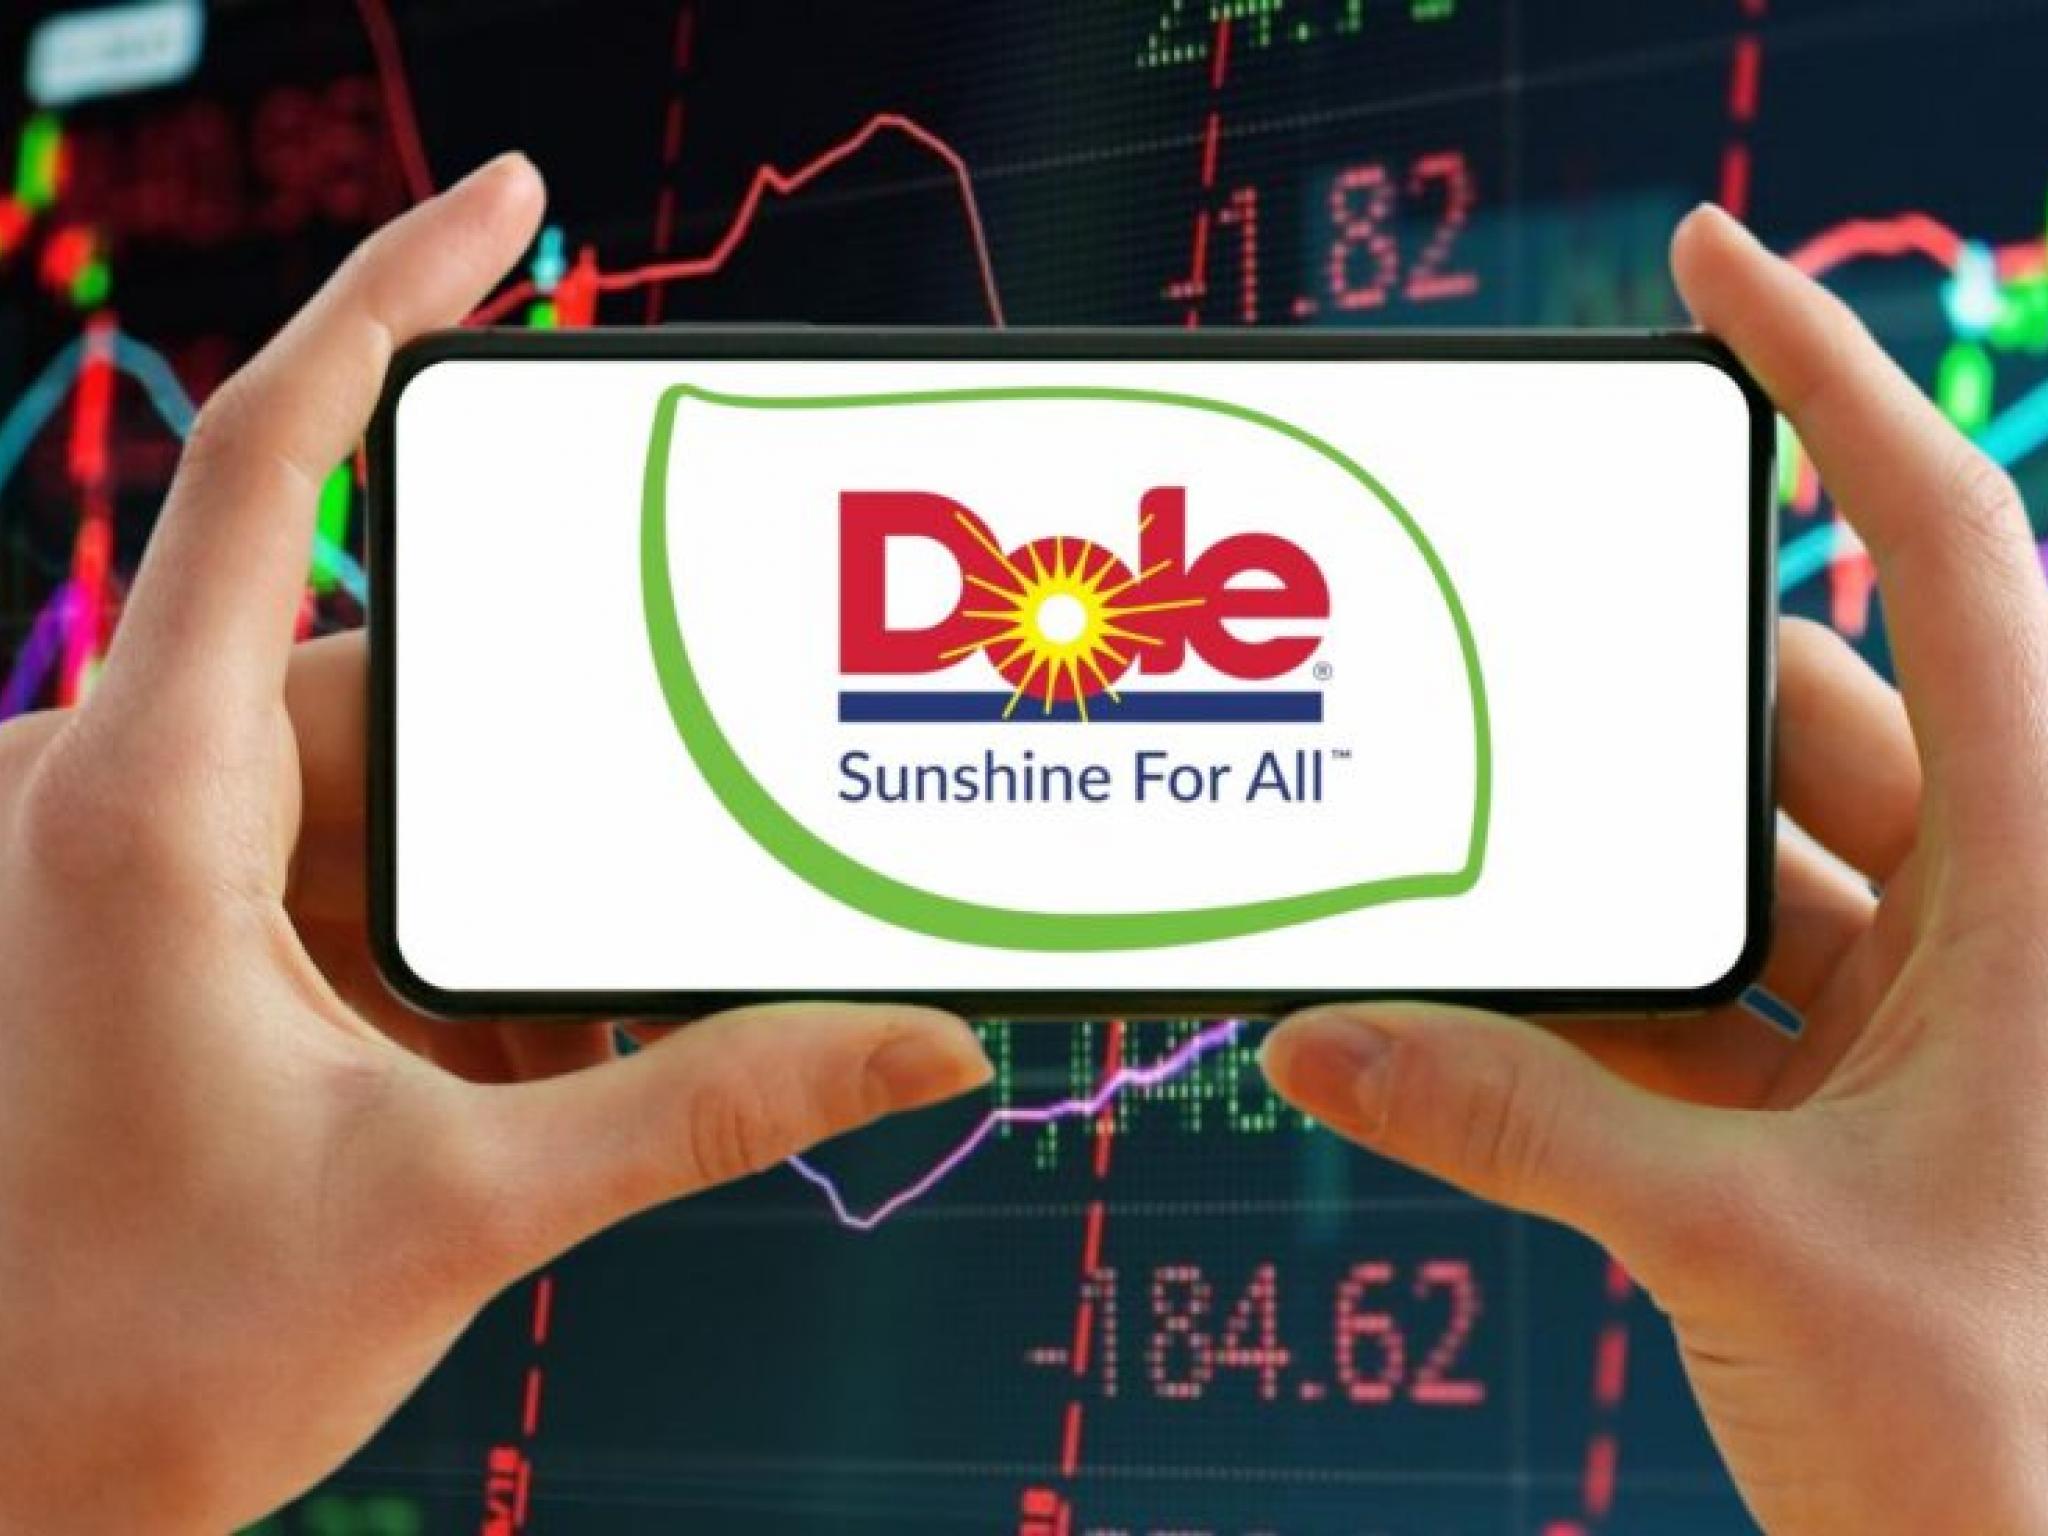  how-to-earn-500-a-month-from-dole-stock-ahead-of-q1-earnings-report 